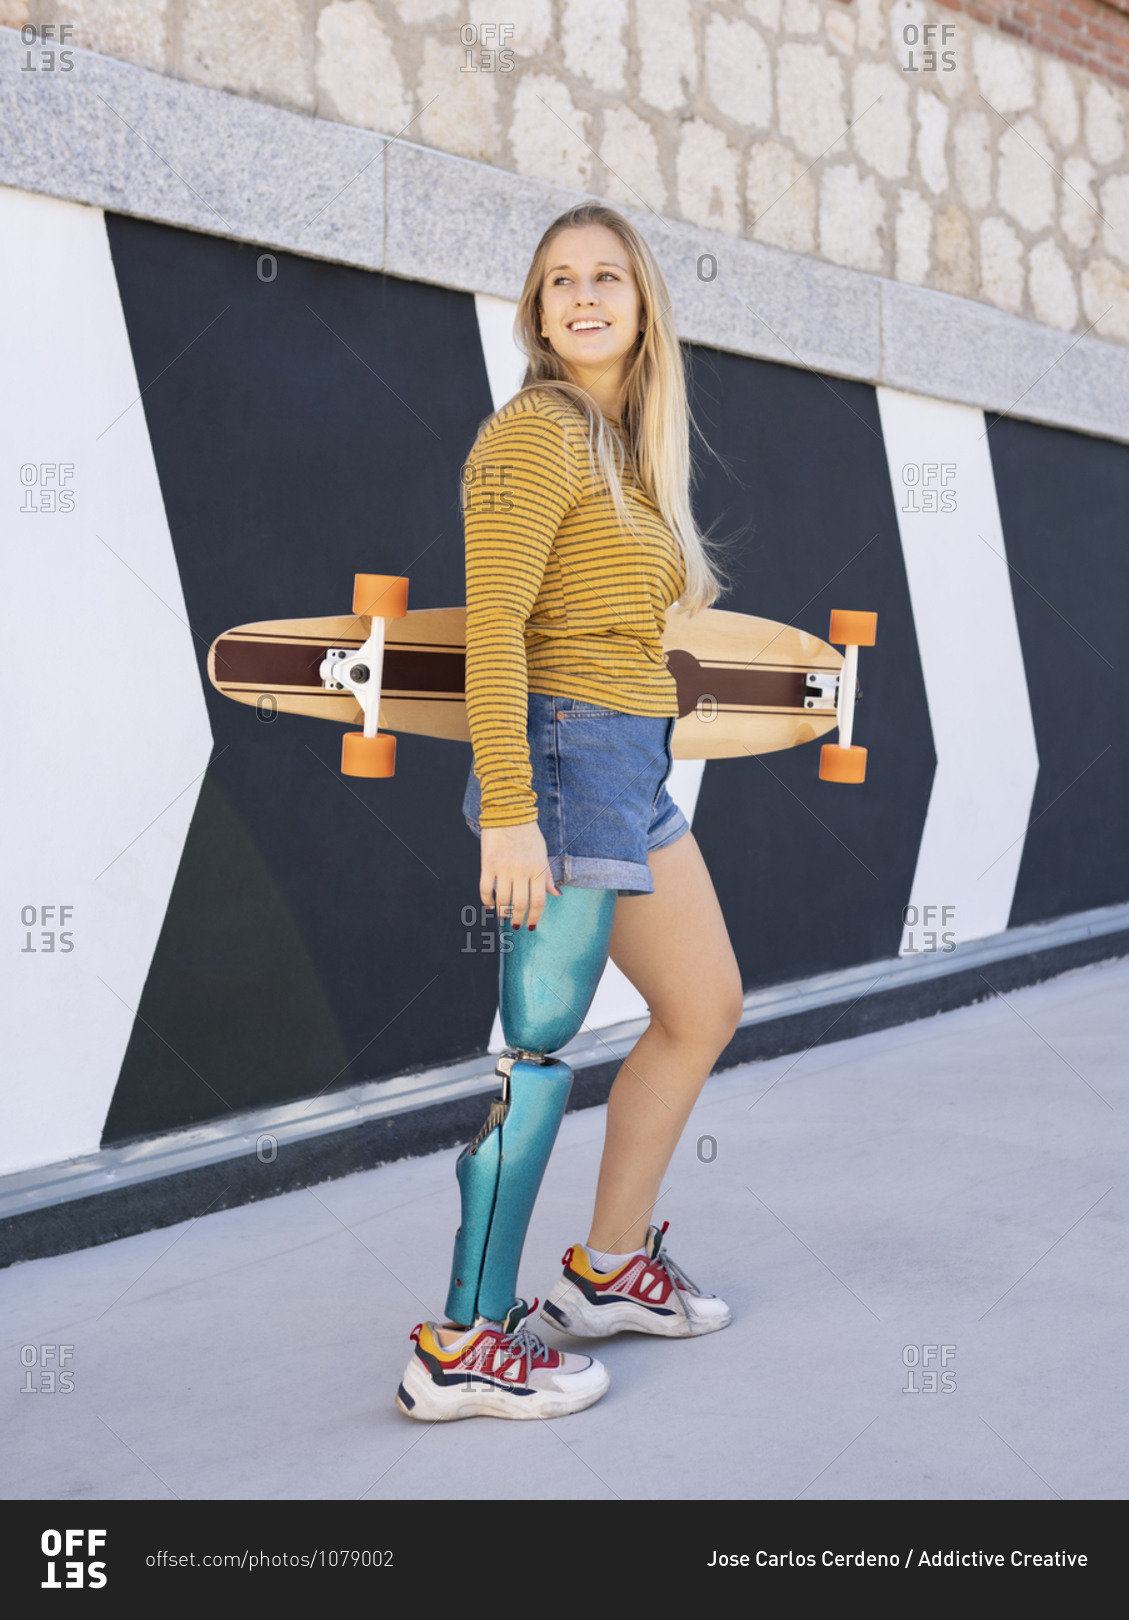 Delighted female skater with bionic prosthesis of leg standing near building in street and looking away